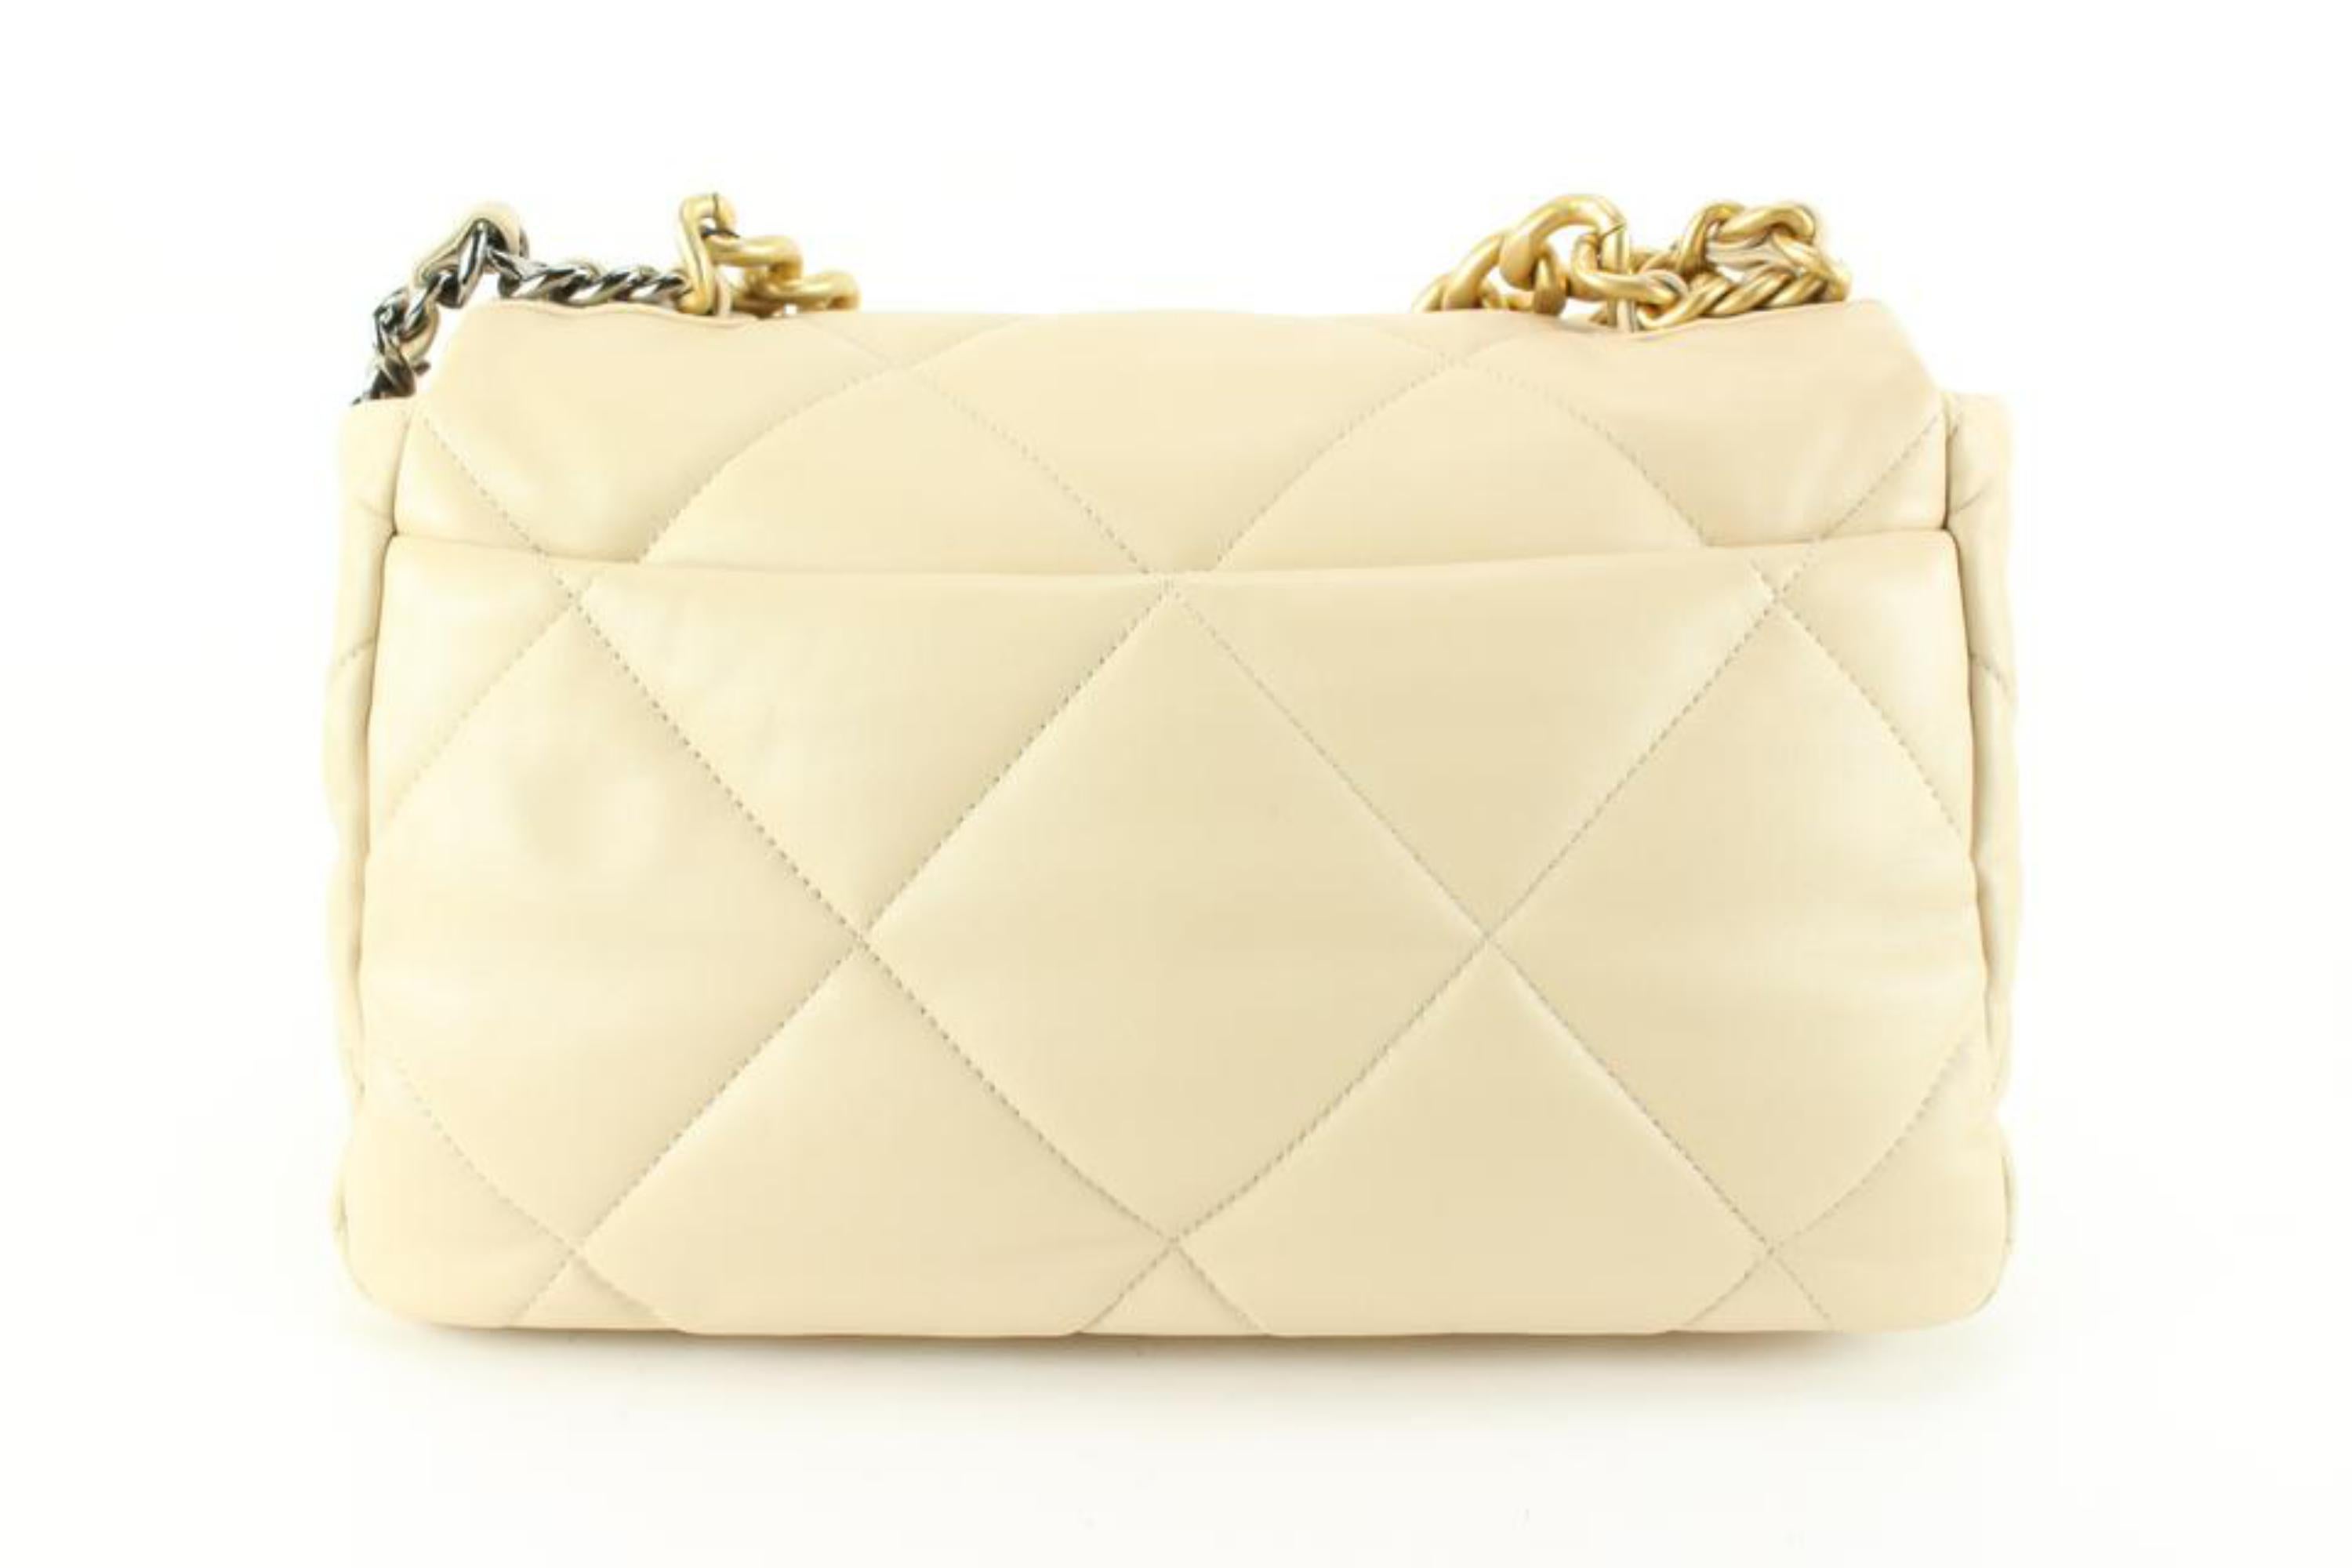 Chanel Beige Quilted Lambskin Large Chanel 19 Flap 66cc725s For Sale 1